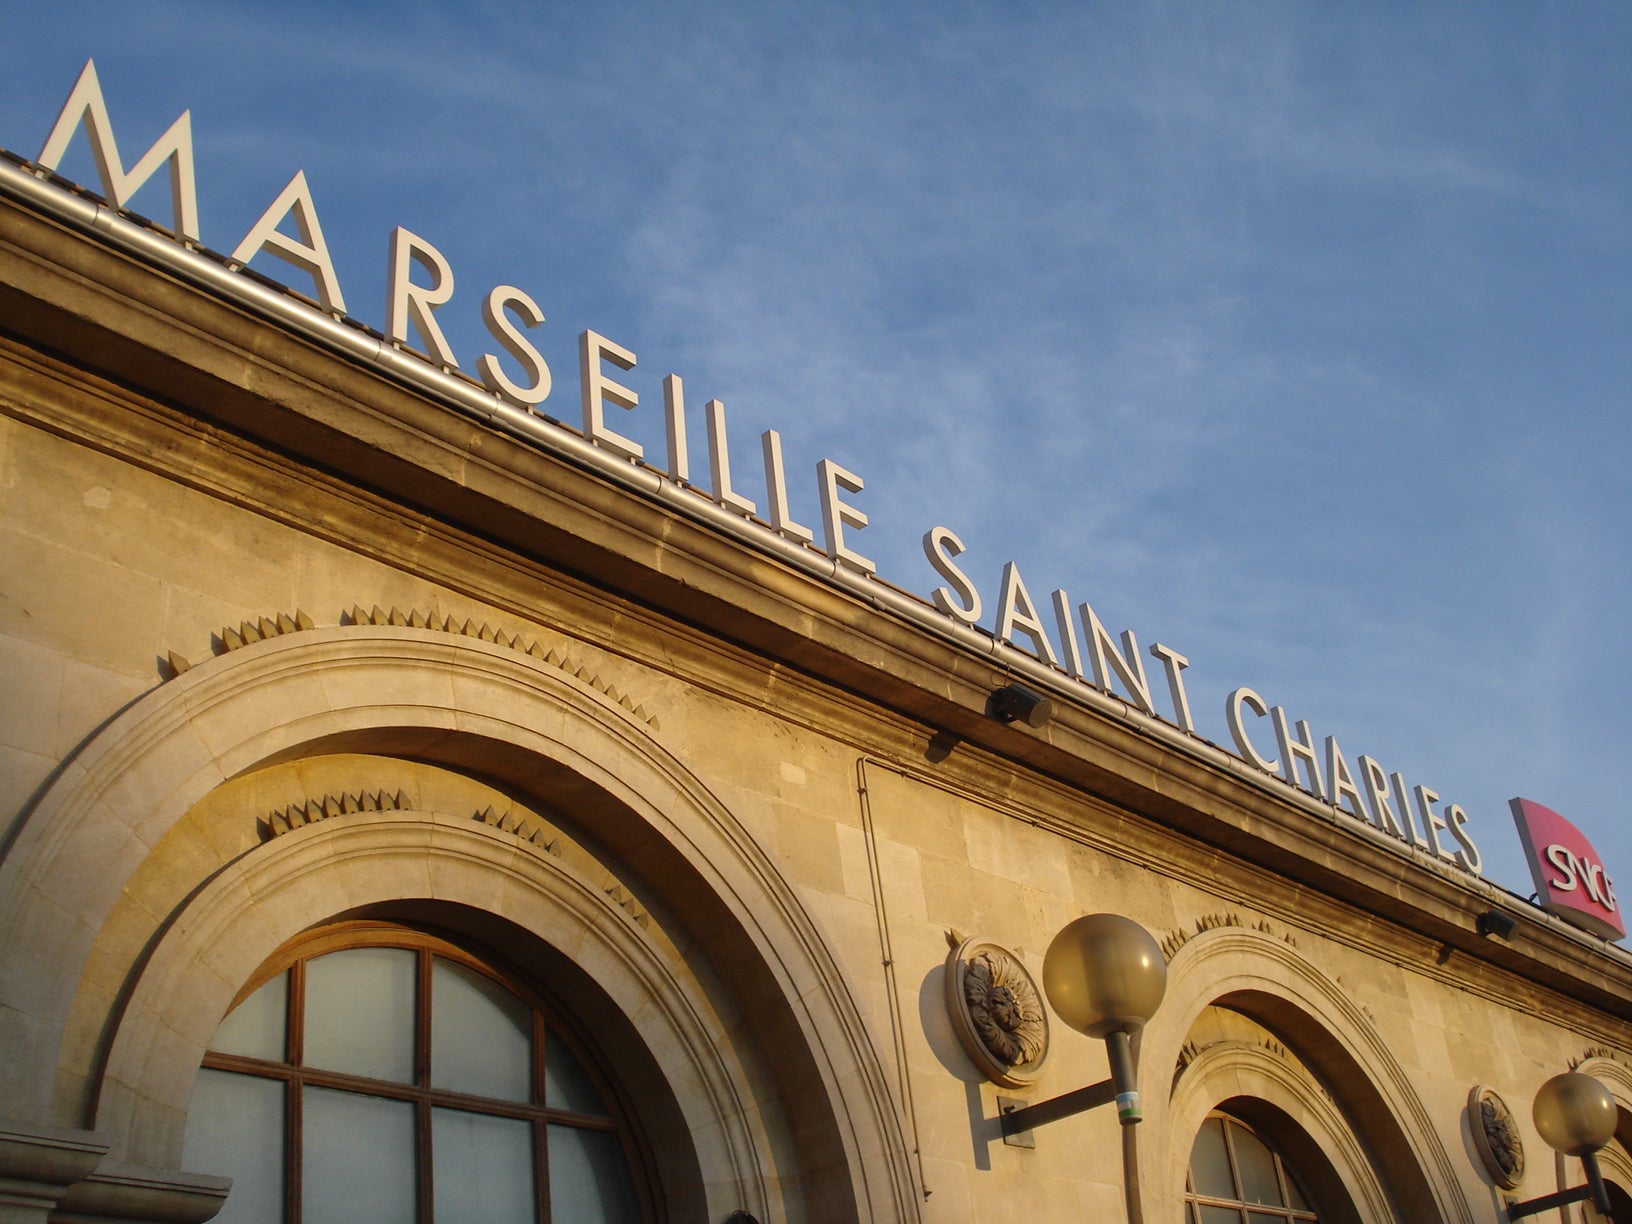 Departing soon: Marseille St-Charles station, starting point for many trains in southern France